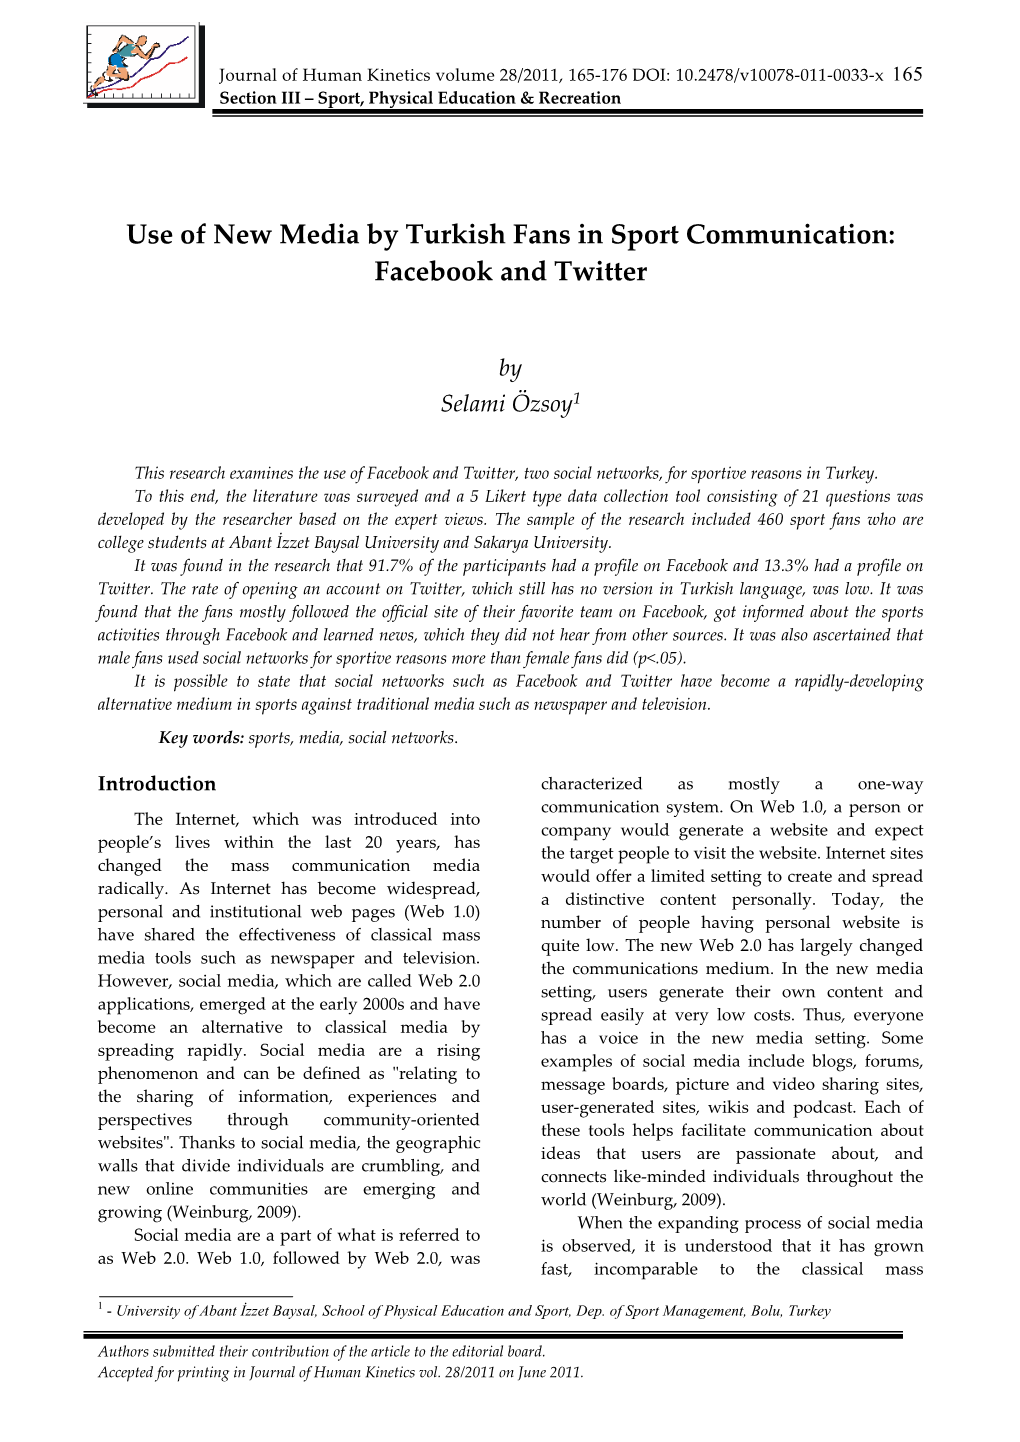 Use of New Media by Turkish Fans in Sport Communication: Facebook and Twitter